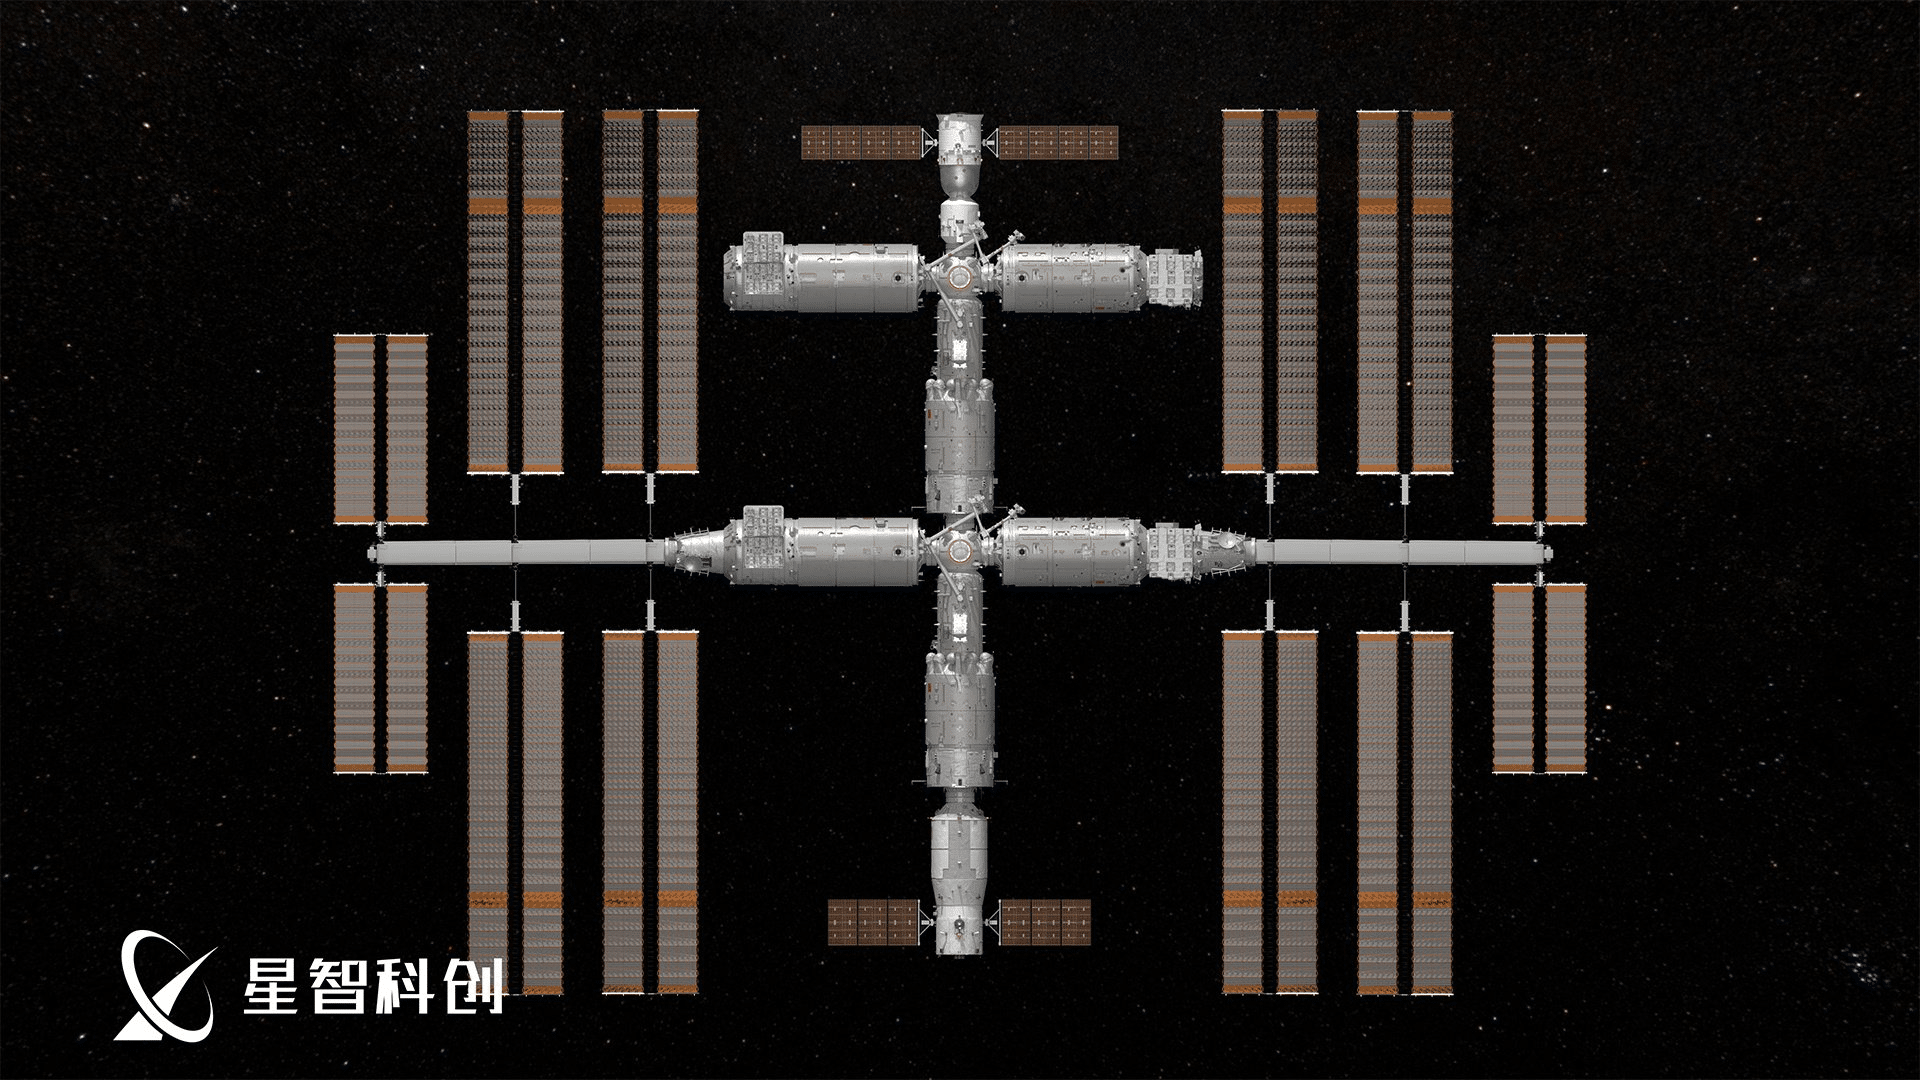 China unveils ambitious plans to expand its space station 1